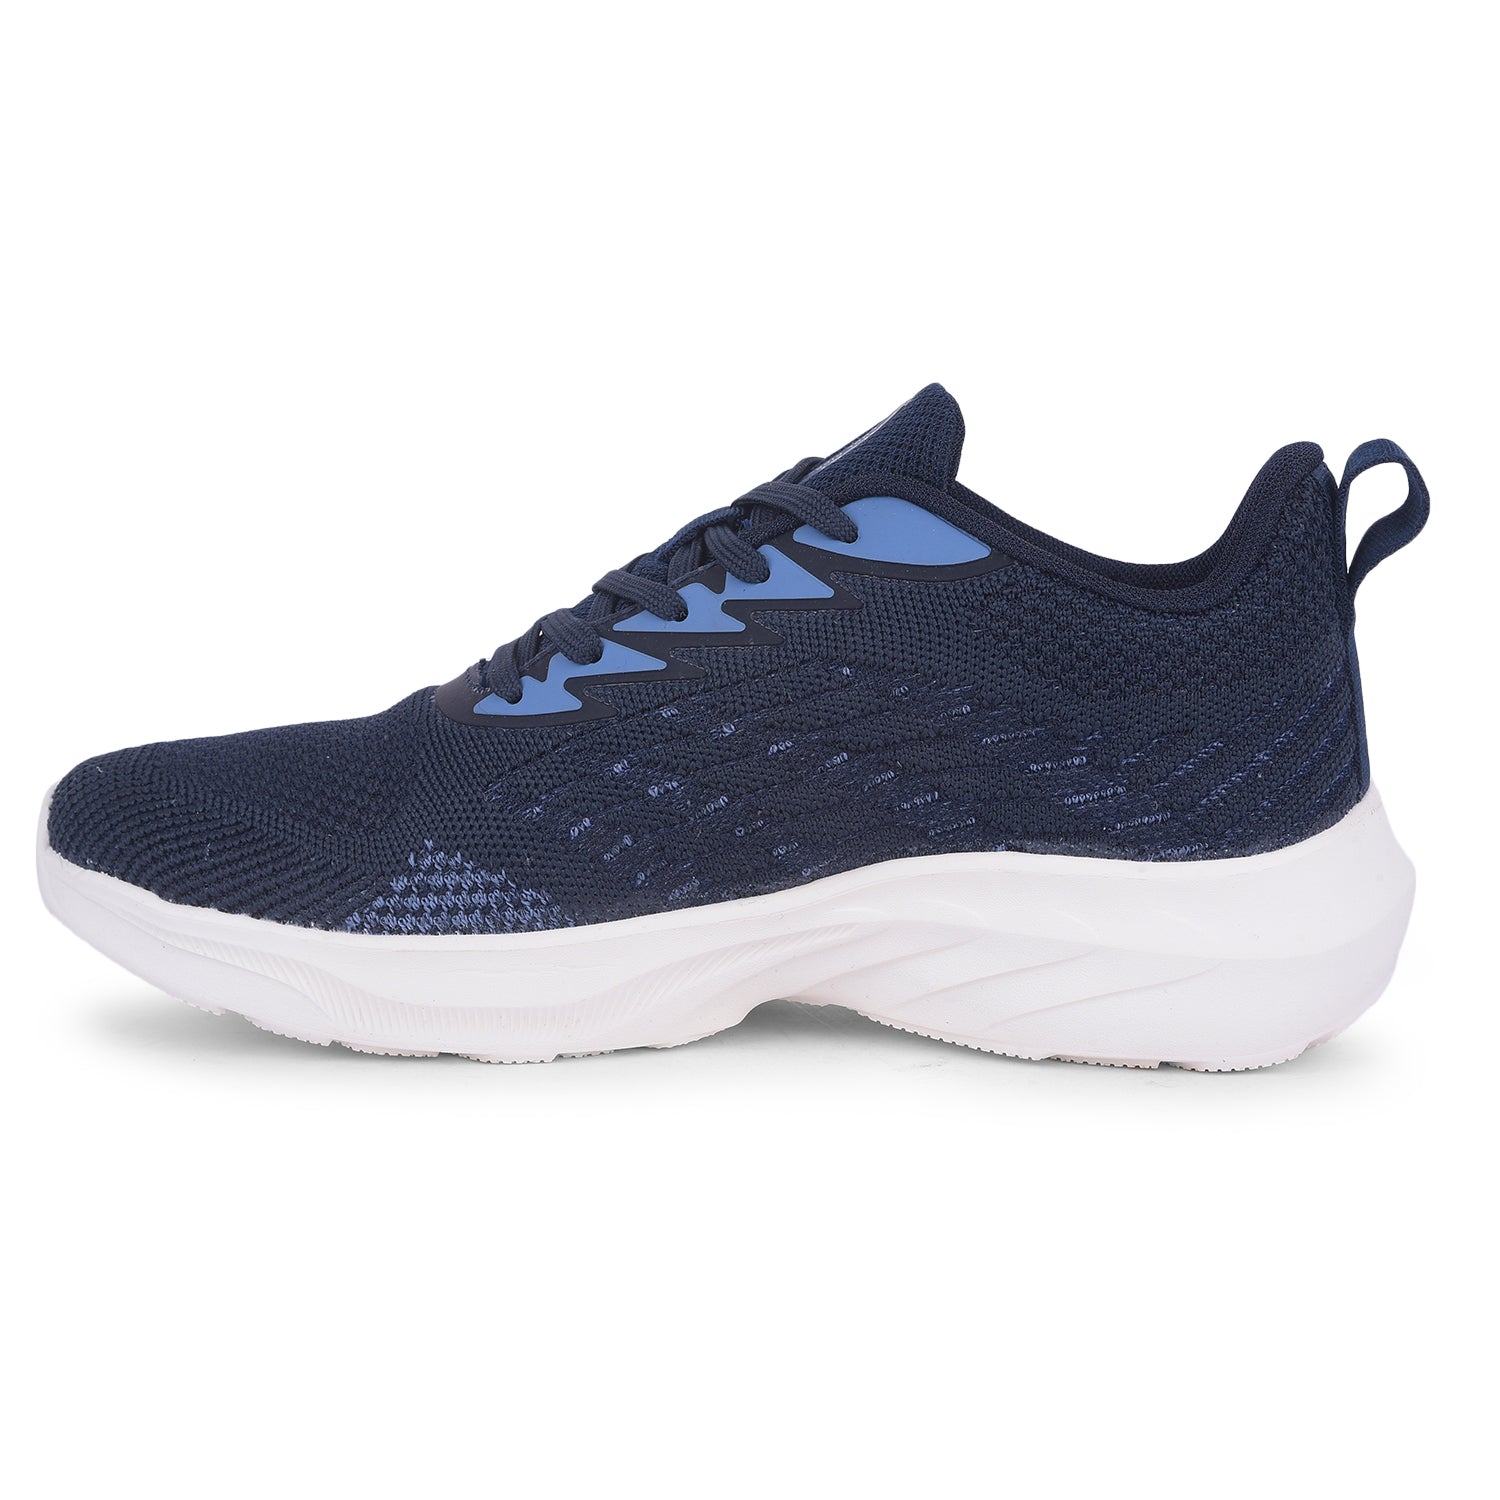 Calcetto CLT-2045 Navy Sports Shoes For Men